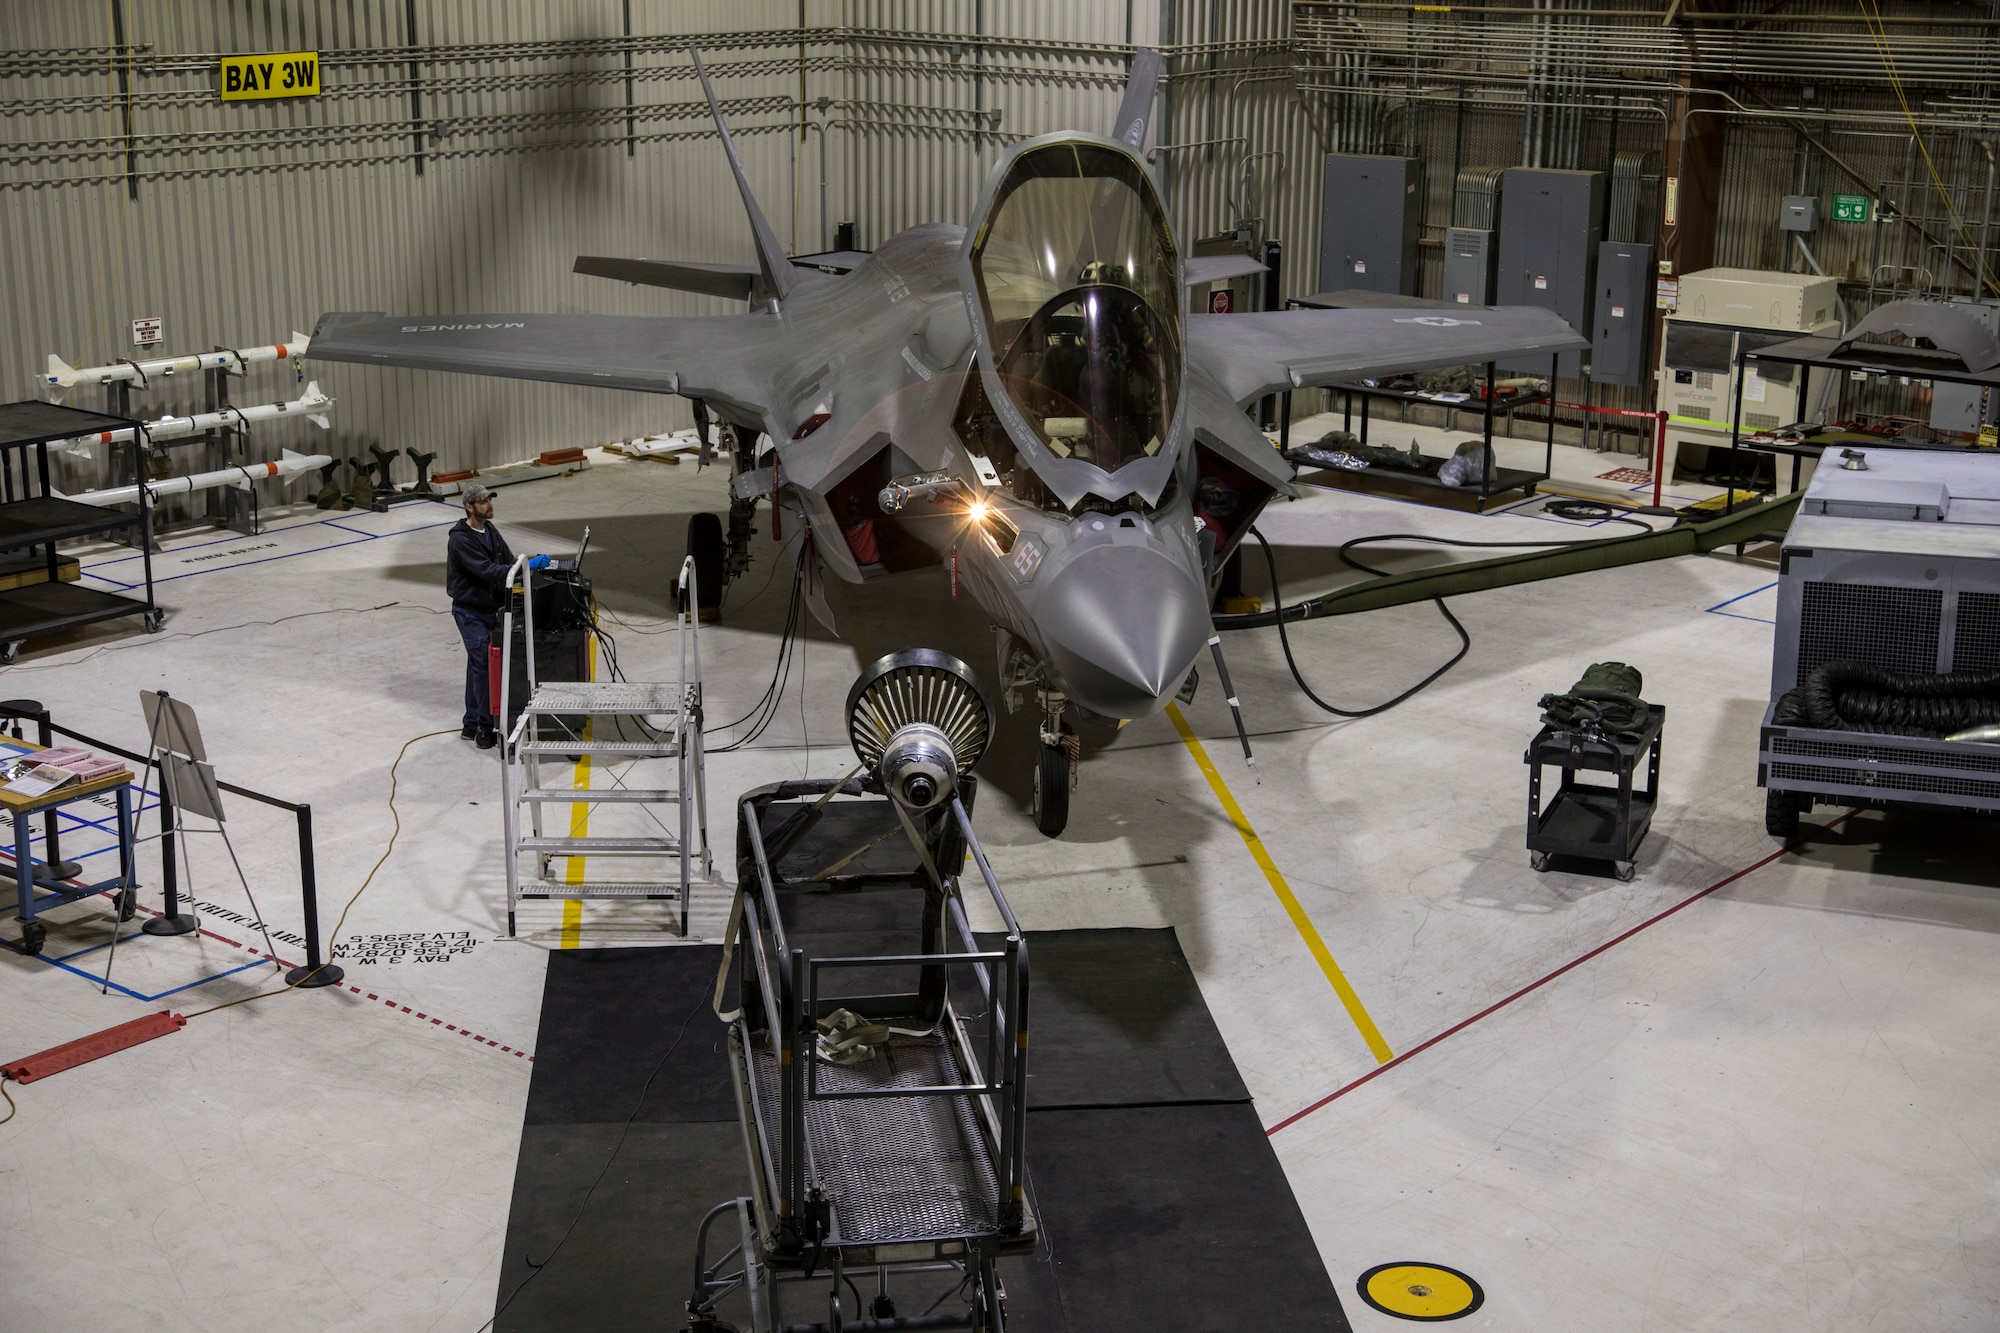 A U.S. Marine Corps F-35B from Air Test and Evaluation Squadron 23 (VX-23), Naval Air Station Patuxent River, Maryland, undergoes a ground test of an improved probe light assembly in an Edwards Air Force Base hangar Feb. 28. The F-35 program recently completed testing on an improved lighting assembly with the KC-135 Stratotanker that will enable the Navy and Marine Corps F-35 variants to refuel behind the tanker at night. Flight testing of the redesigned light, which attaches to a refueling probe, was led by Patuxent River Naval Air Station, Maryland, and supported by Edwards Air Force Base, California. (Courtesy photo by Jonathan Case/Lockheed Martin)